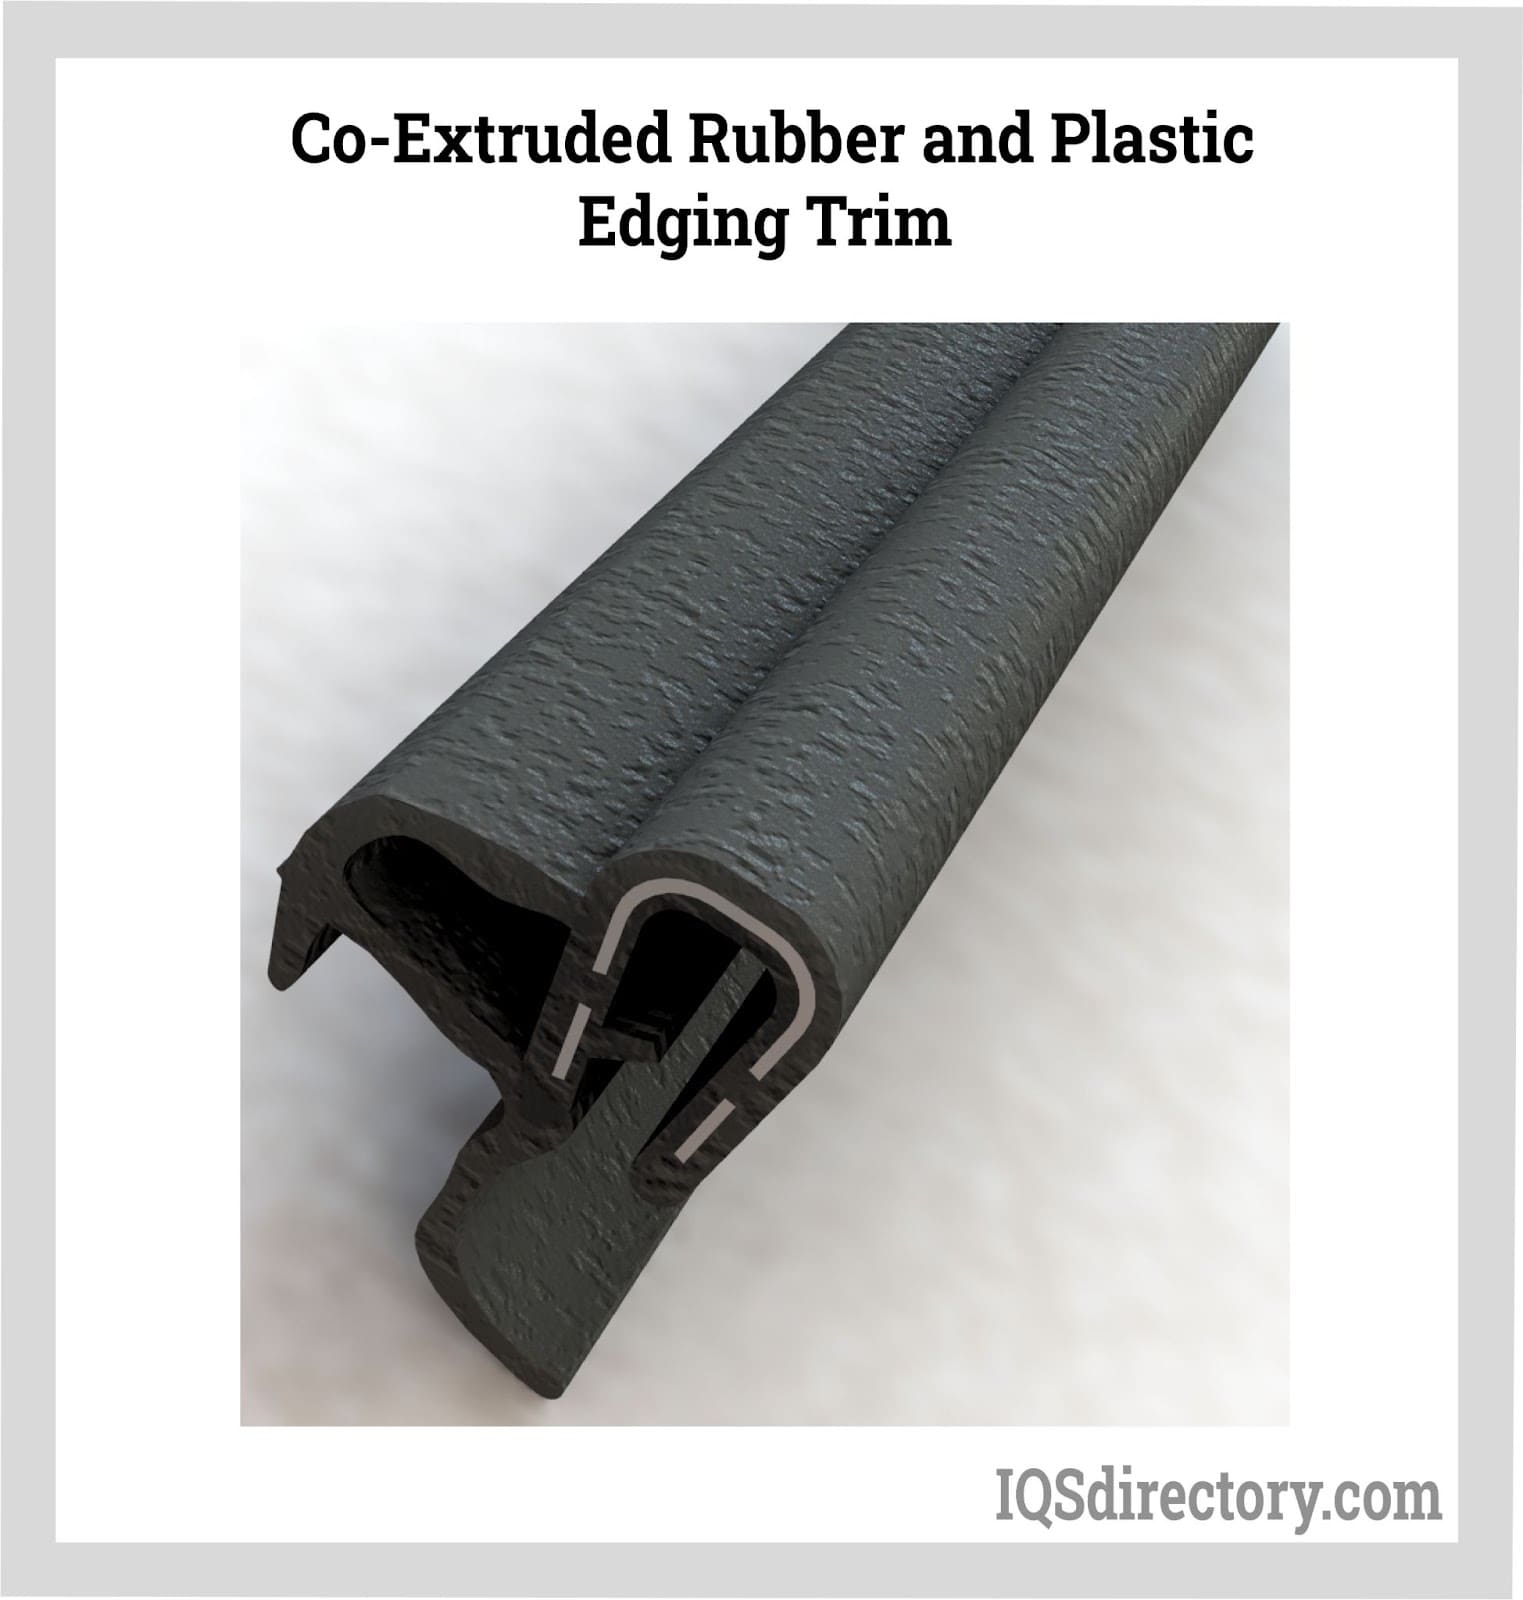 Co-Extruded Rubber and Plastic Edging Trim